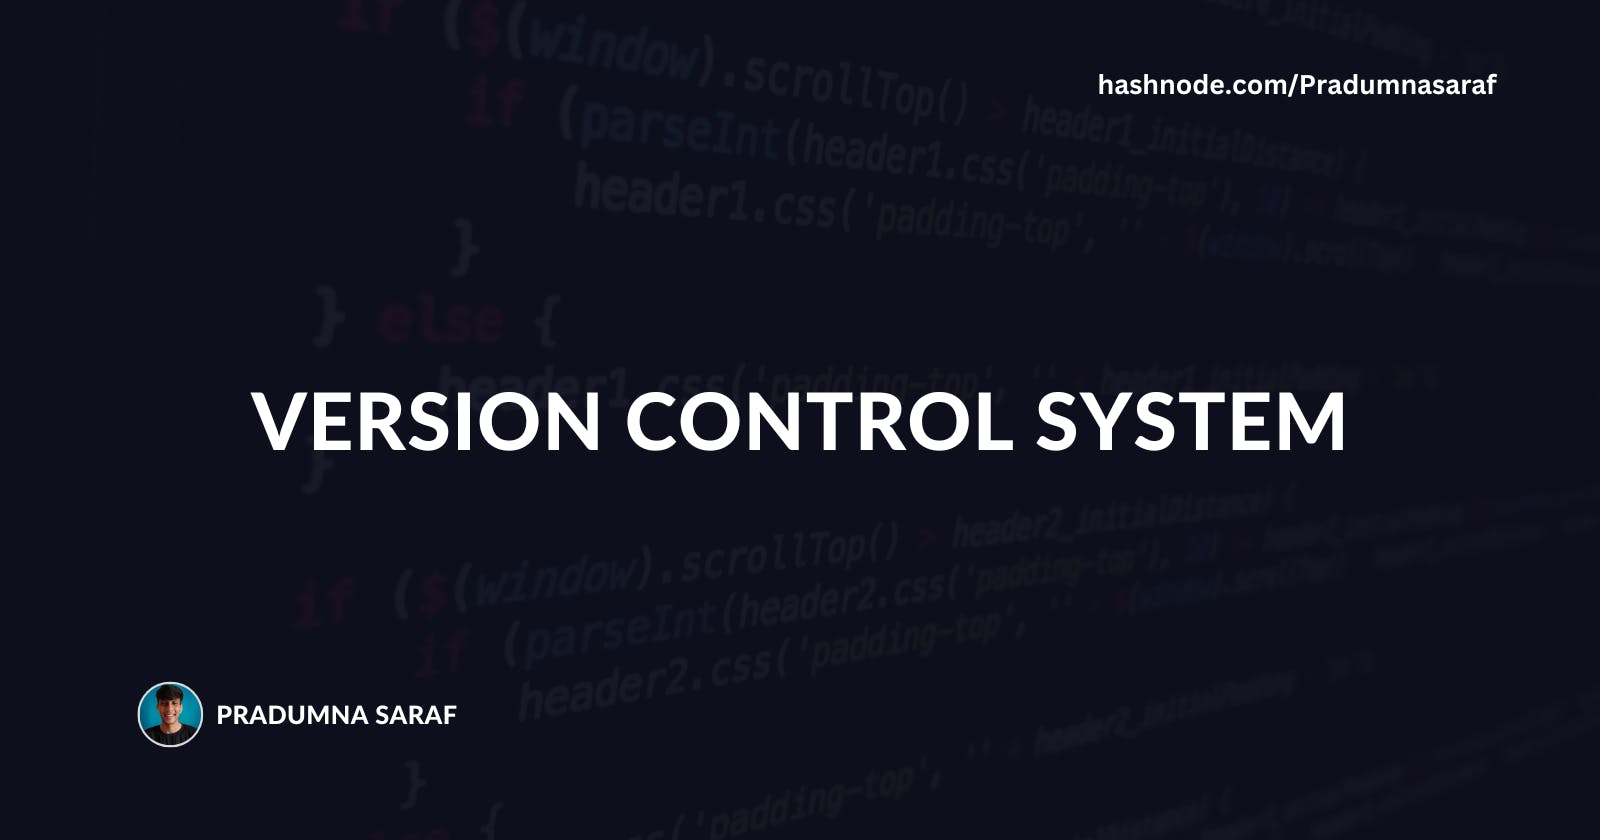 What is a Version control system (VCS)?